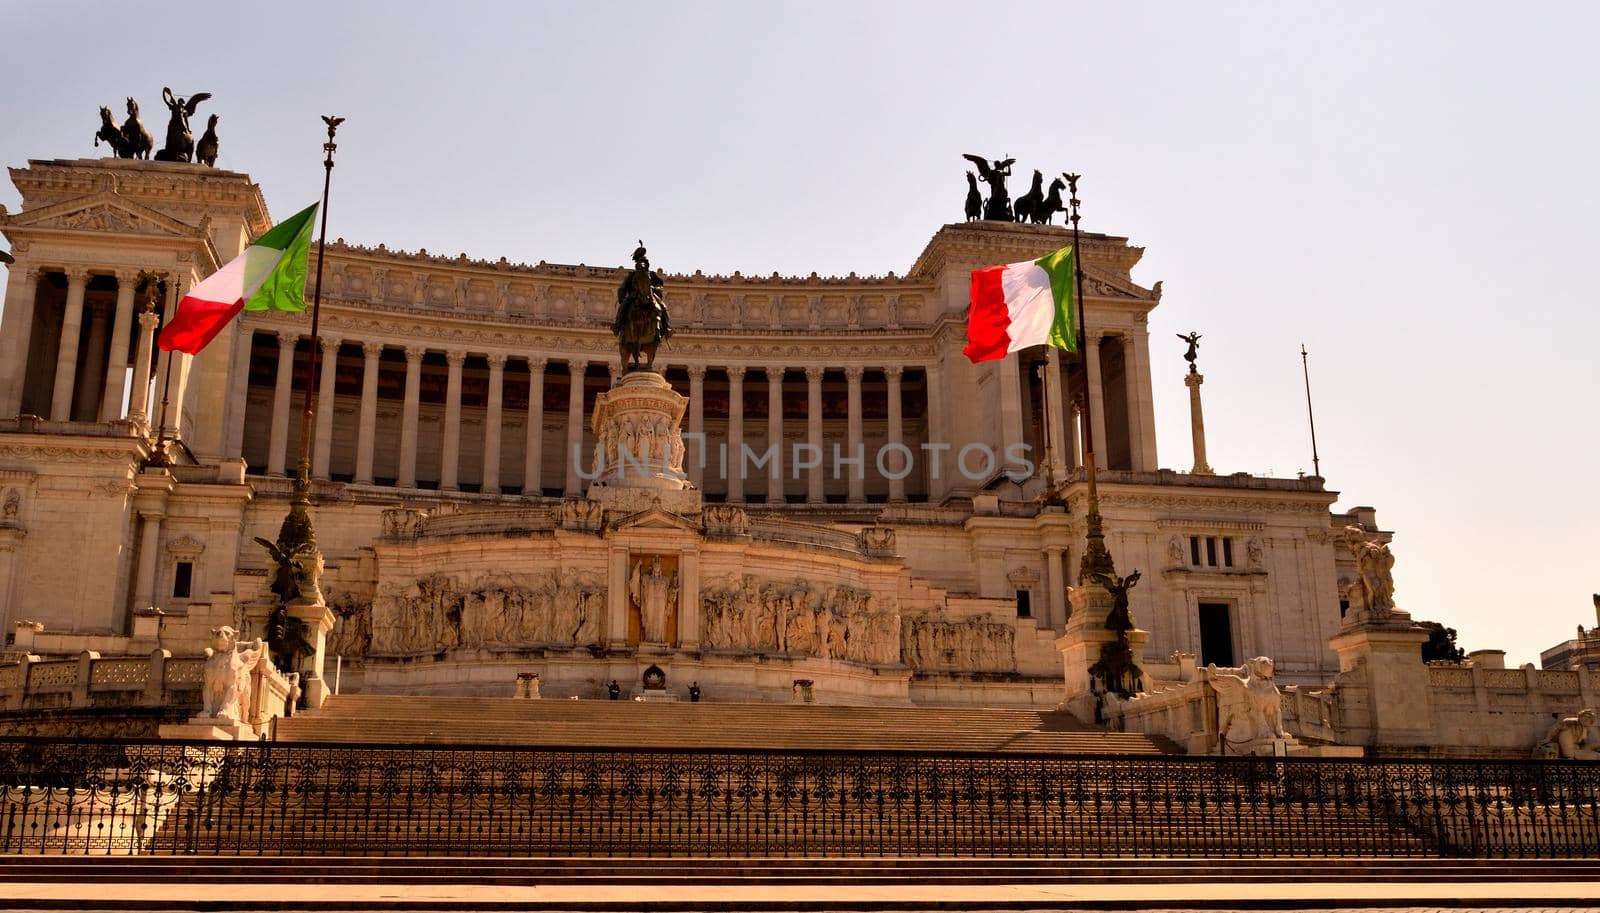 April 8th 2020, Rome, Italy: View of the Altar of the Fatherland without tourists due to the lockdown